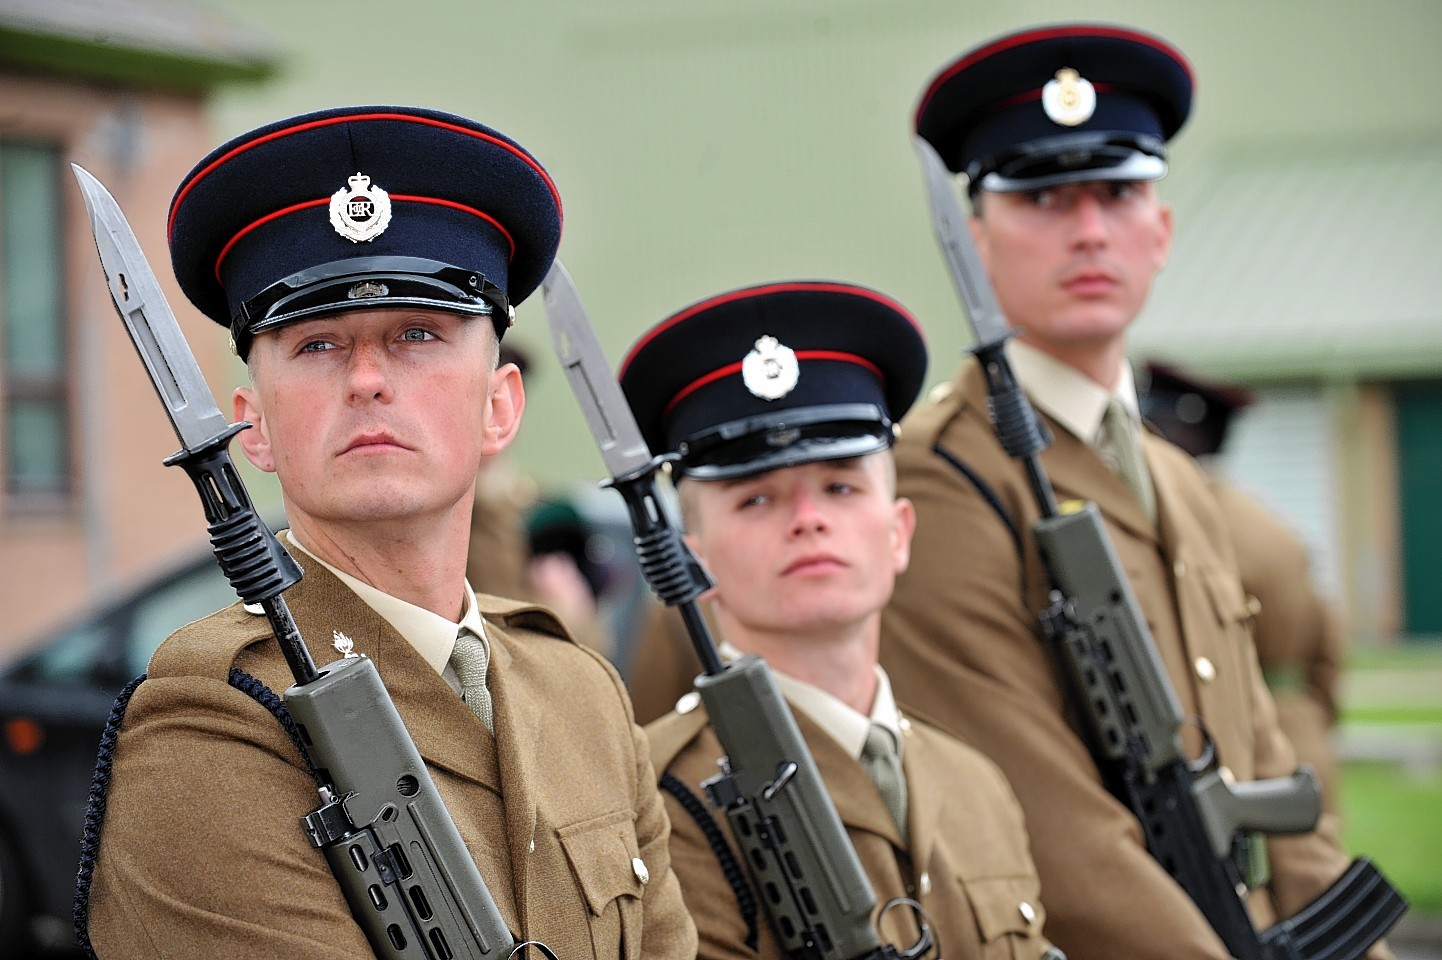 Moray has a "proud association" with the military